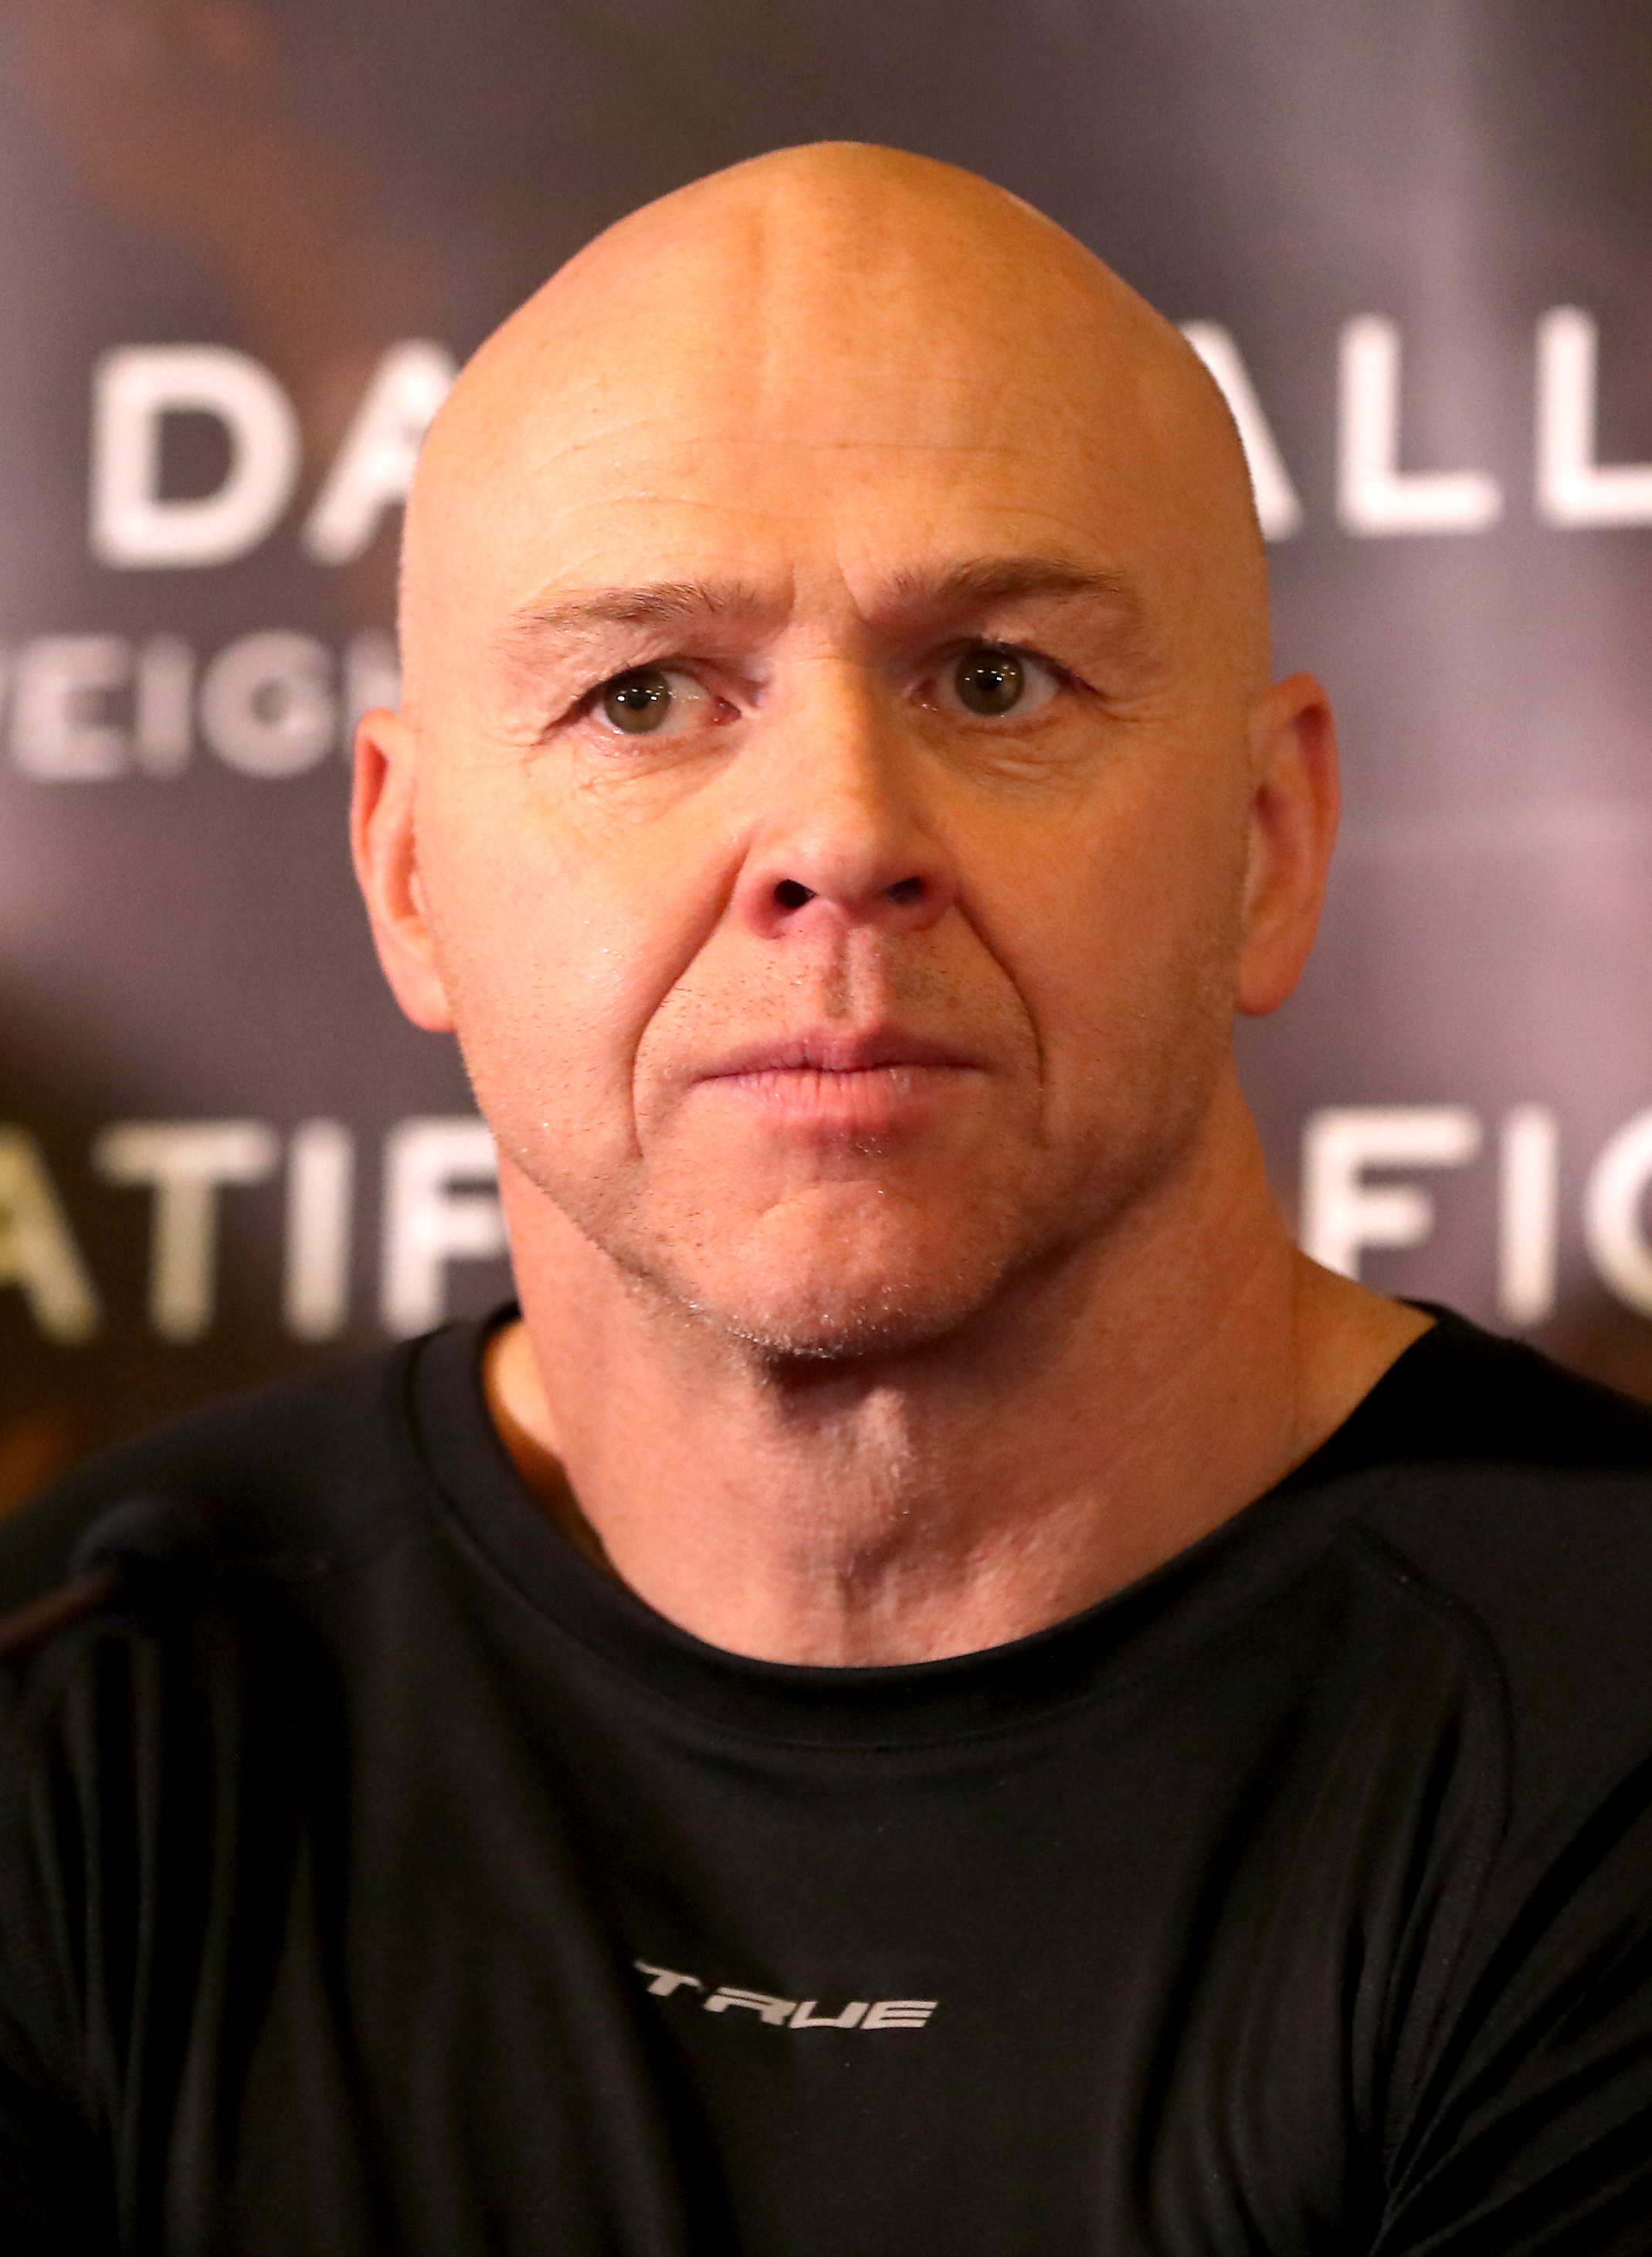 Dominic Ingle at a press conference at Sheffield in 2018 | Source: Getty Images